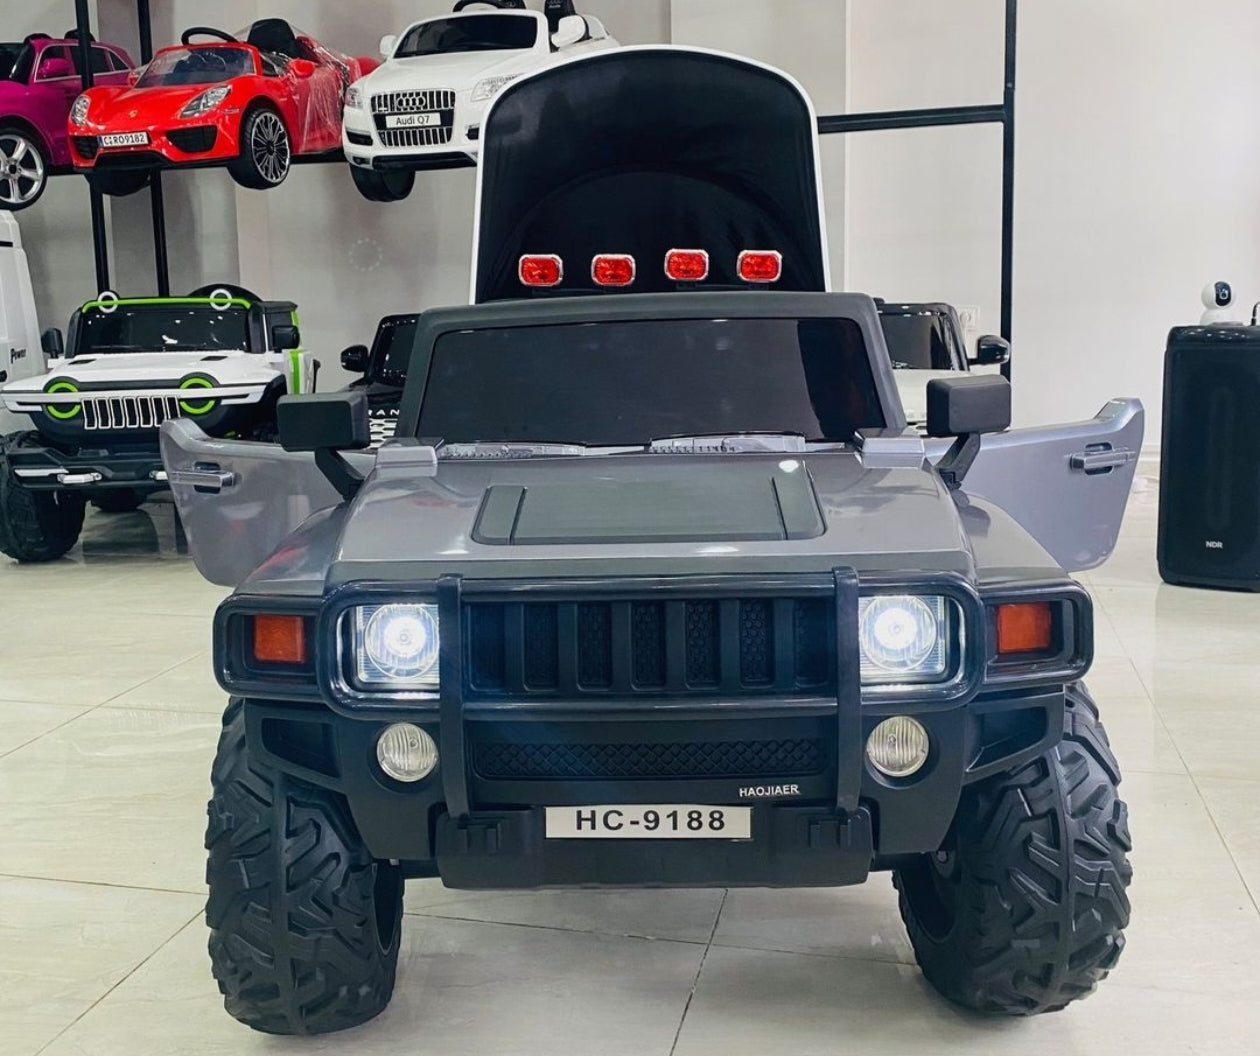 LARGE Size Hummer 1200 Electric Ride On Jeep For Kids With Rechargeable Battery , Swing Function And Music System With Remote Control